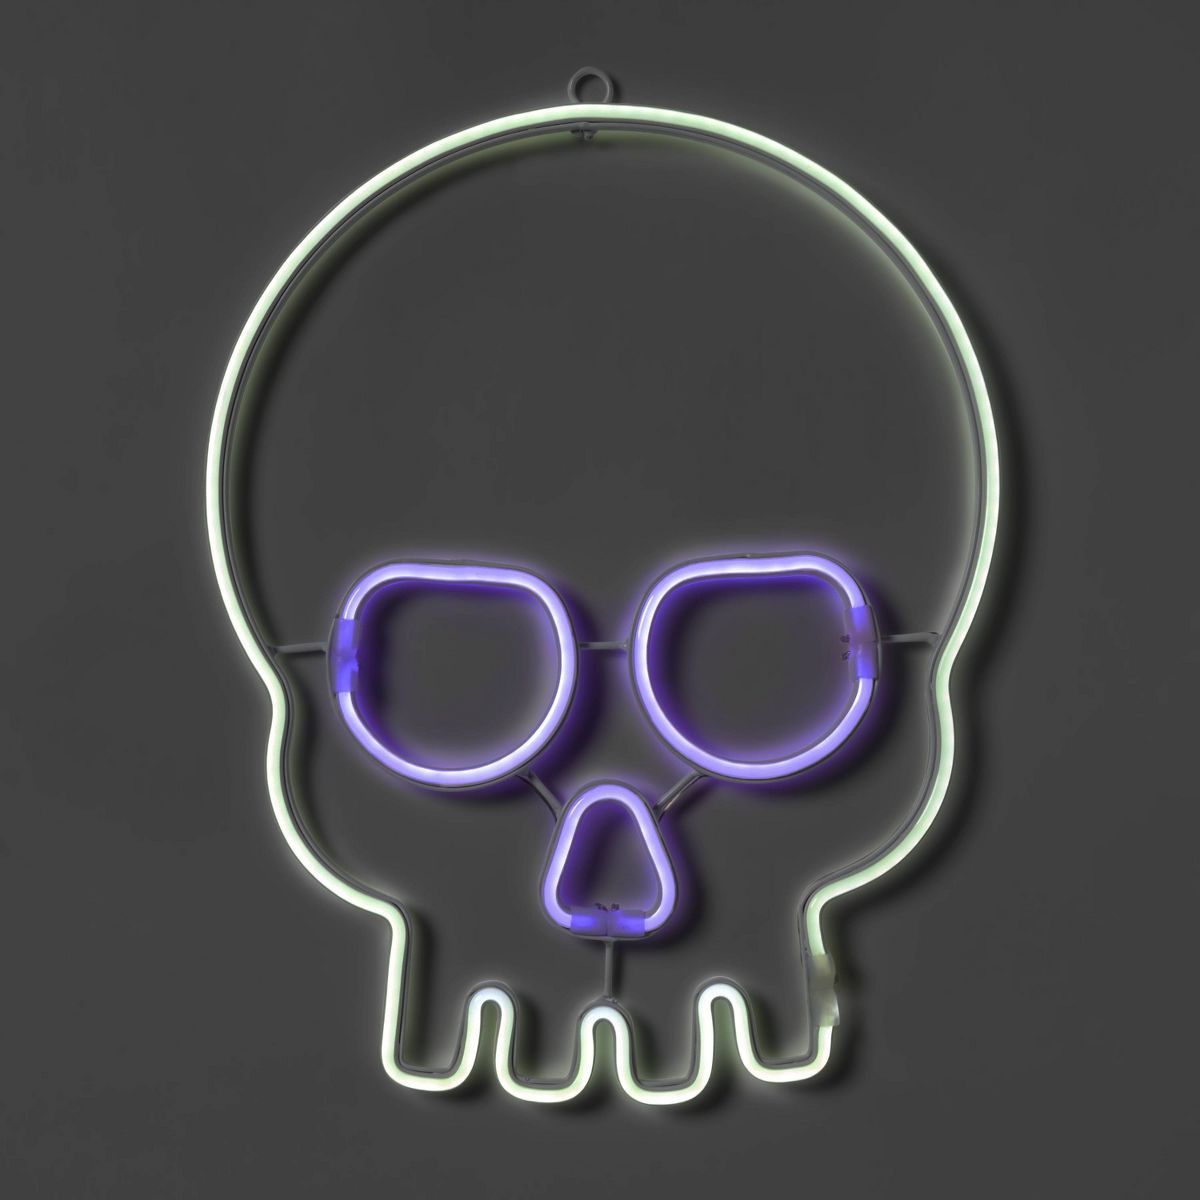 LED Faux Neon Skull White and Purple Halloween Novelty Silhouette Light - Hyde & EEK! Boutique™ | Target